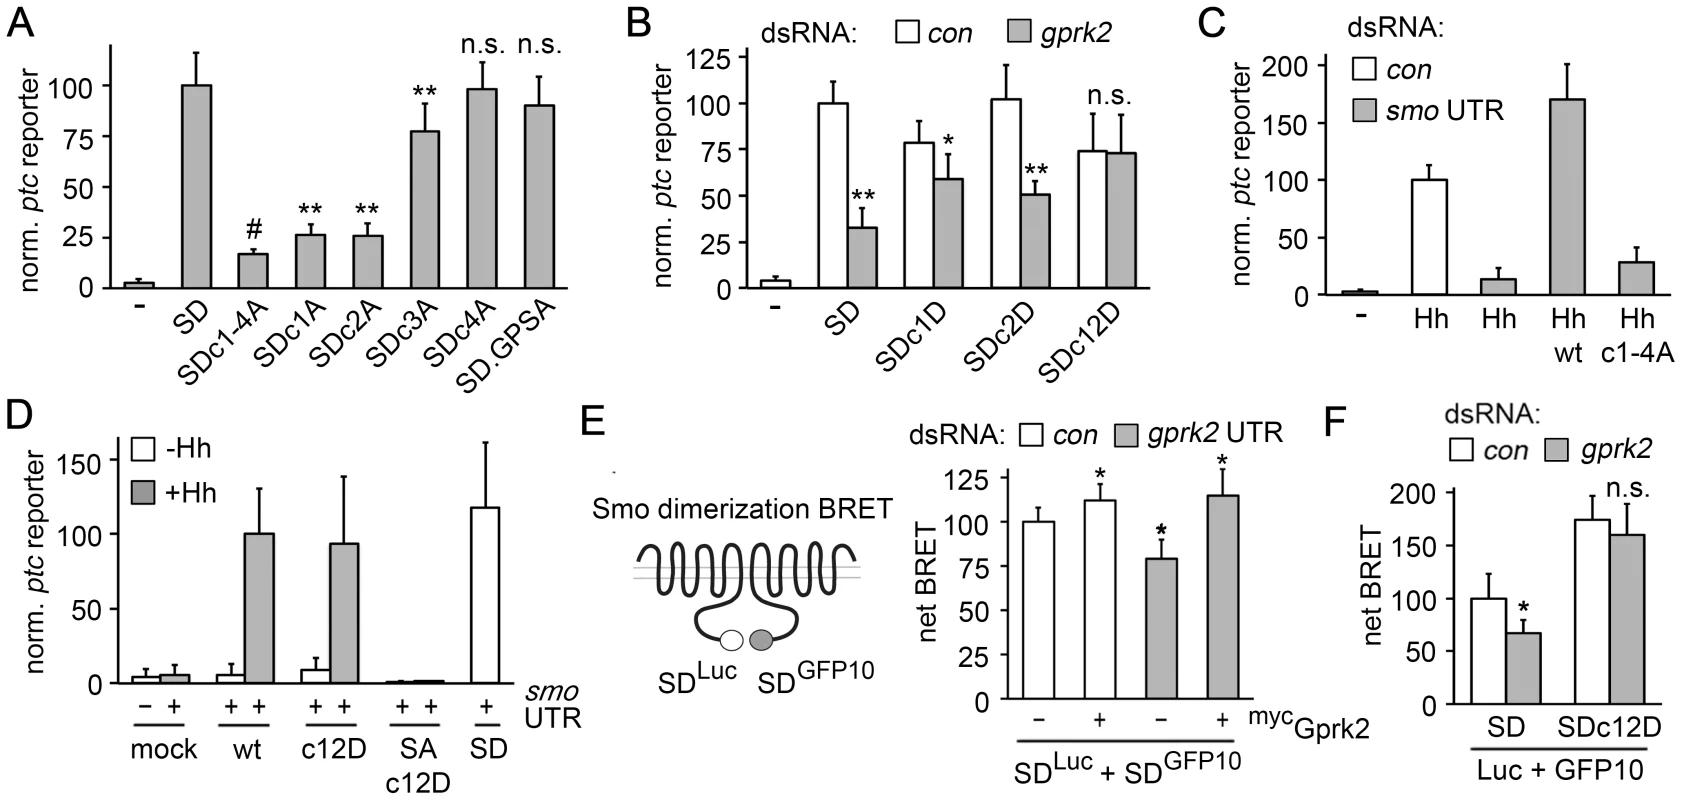 Gprk2 promotes Smo dimerization and activity.